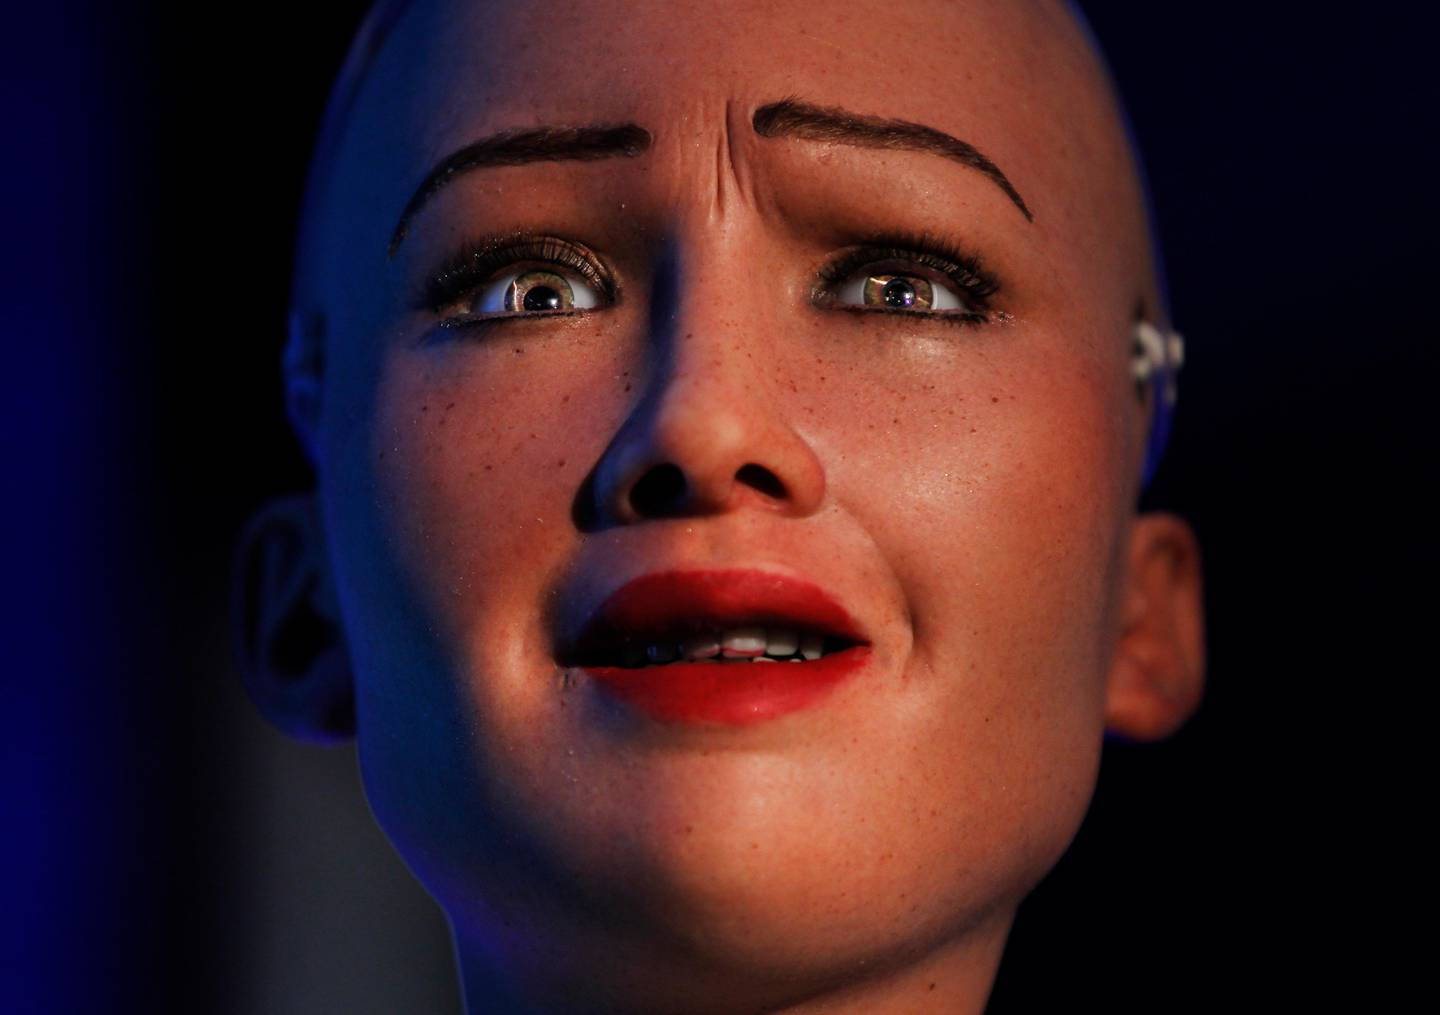 Hanson Robotics' robot Sophia, a lifelike robot powered by artificial intelligence, is displayed in public during the ?ÄúTechnology for Public Services/Development?Äù conference organized by UNDP in Kathmandu, Nepal, Wednesday, March 21, 2018. (AP Photo/Niranjan Shrestha)